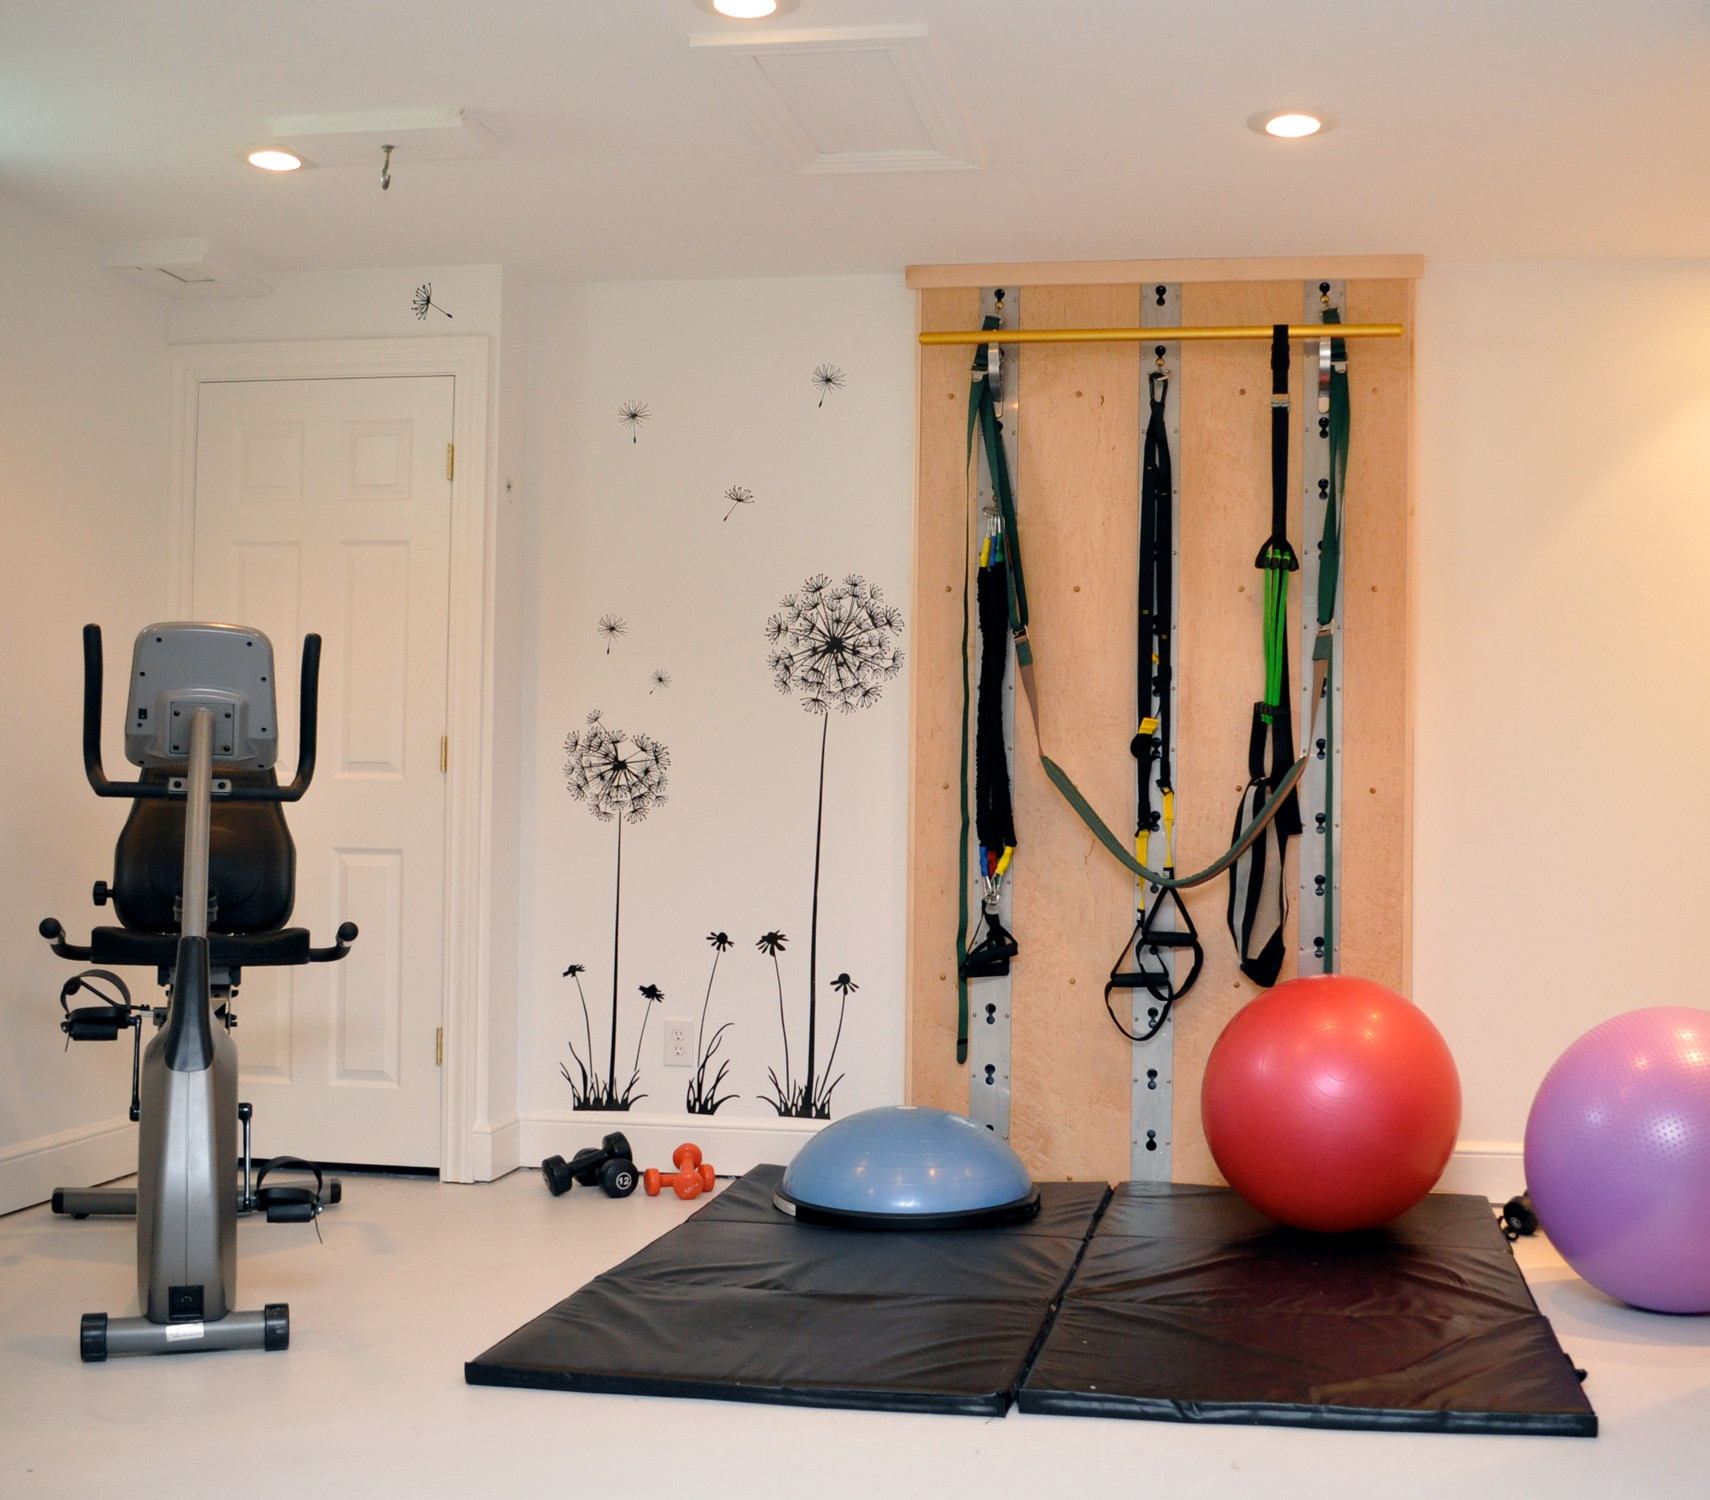 https://st.hzcdn.com/simgs/pictures/home-gyms/isawall-home-workout-room-single-panel-installation-isawall-systems-llc-img~2841028f040896c1_14-2143-1-5363786.jpg